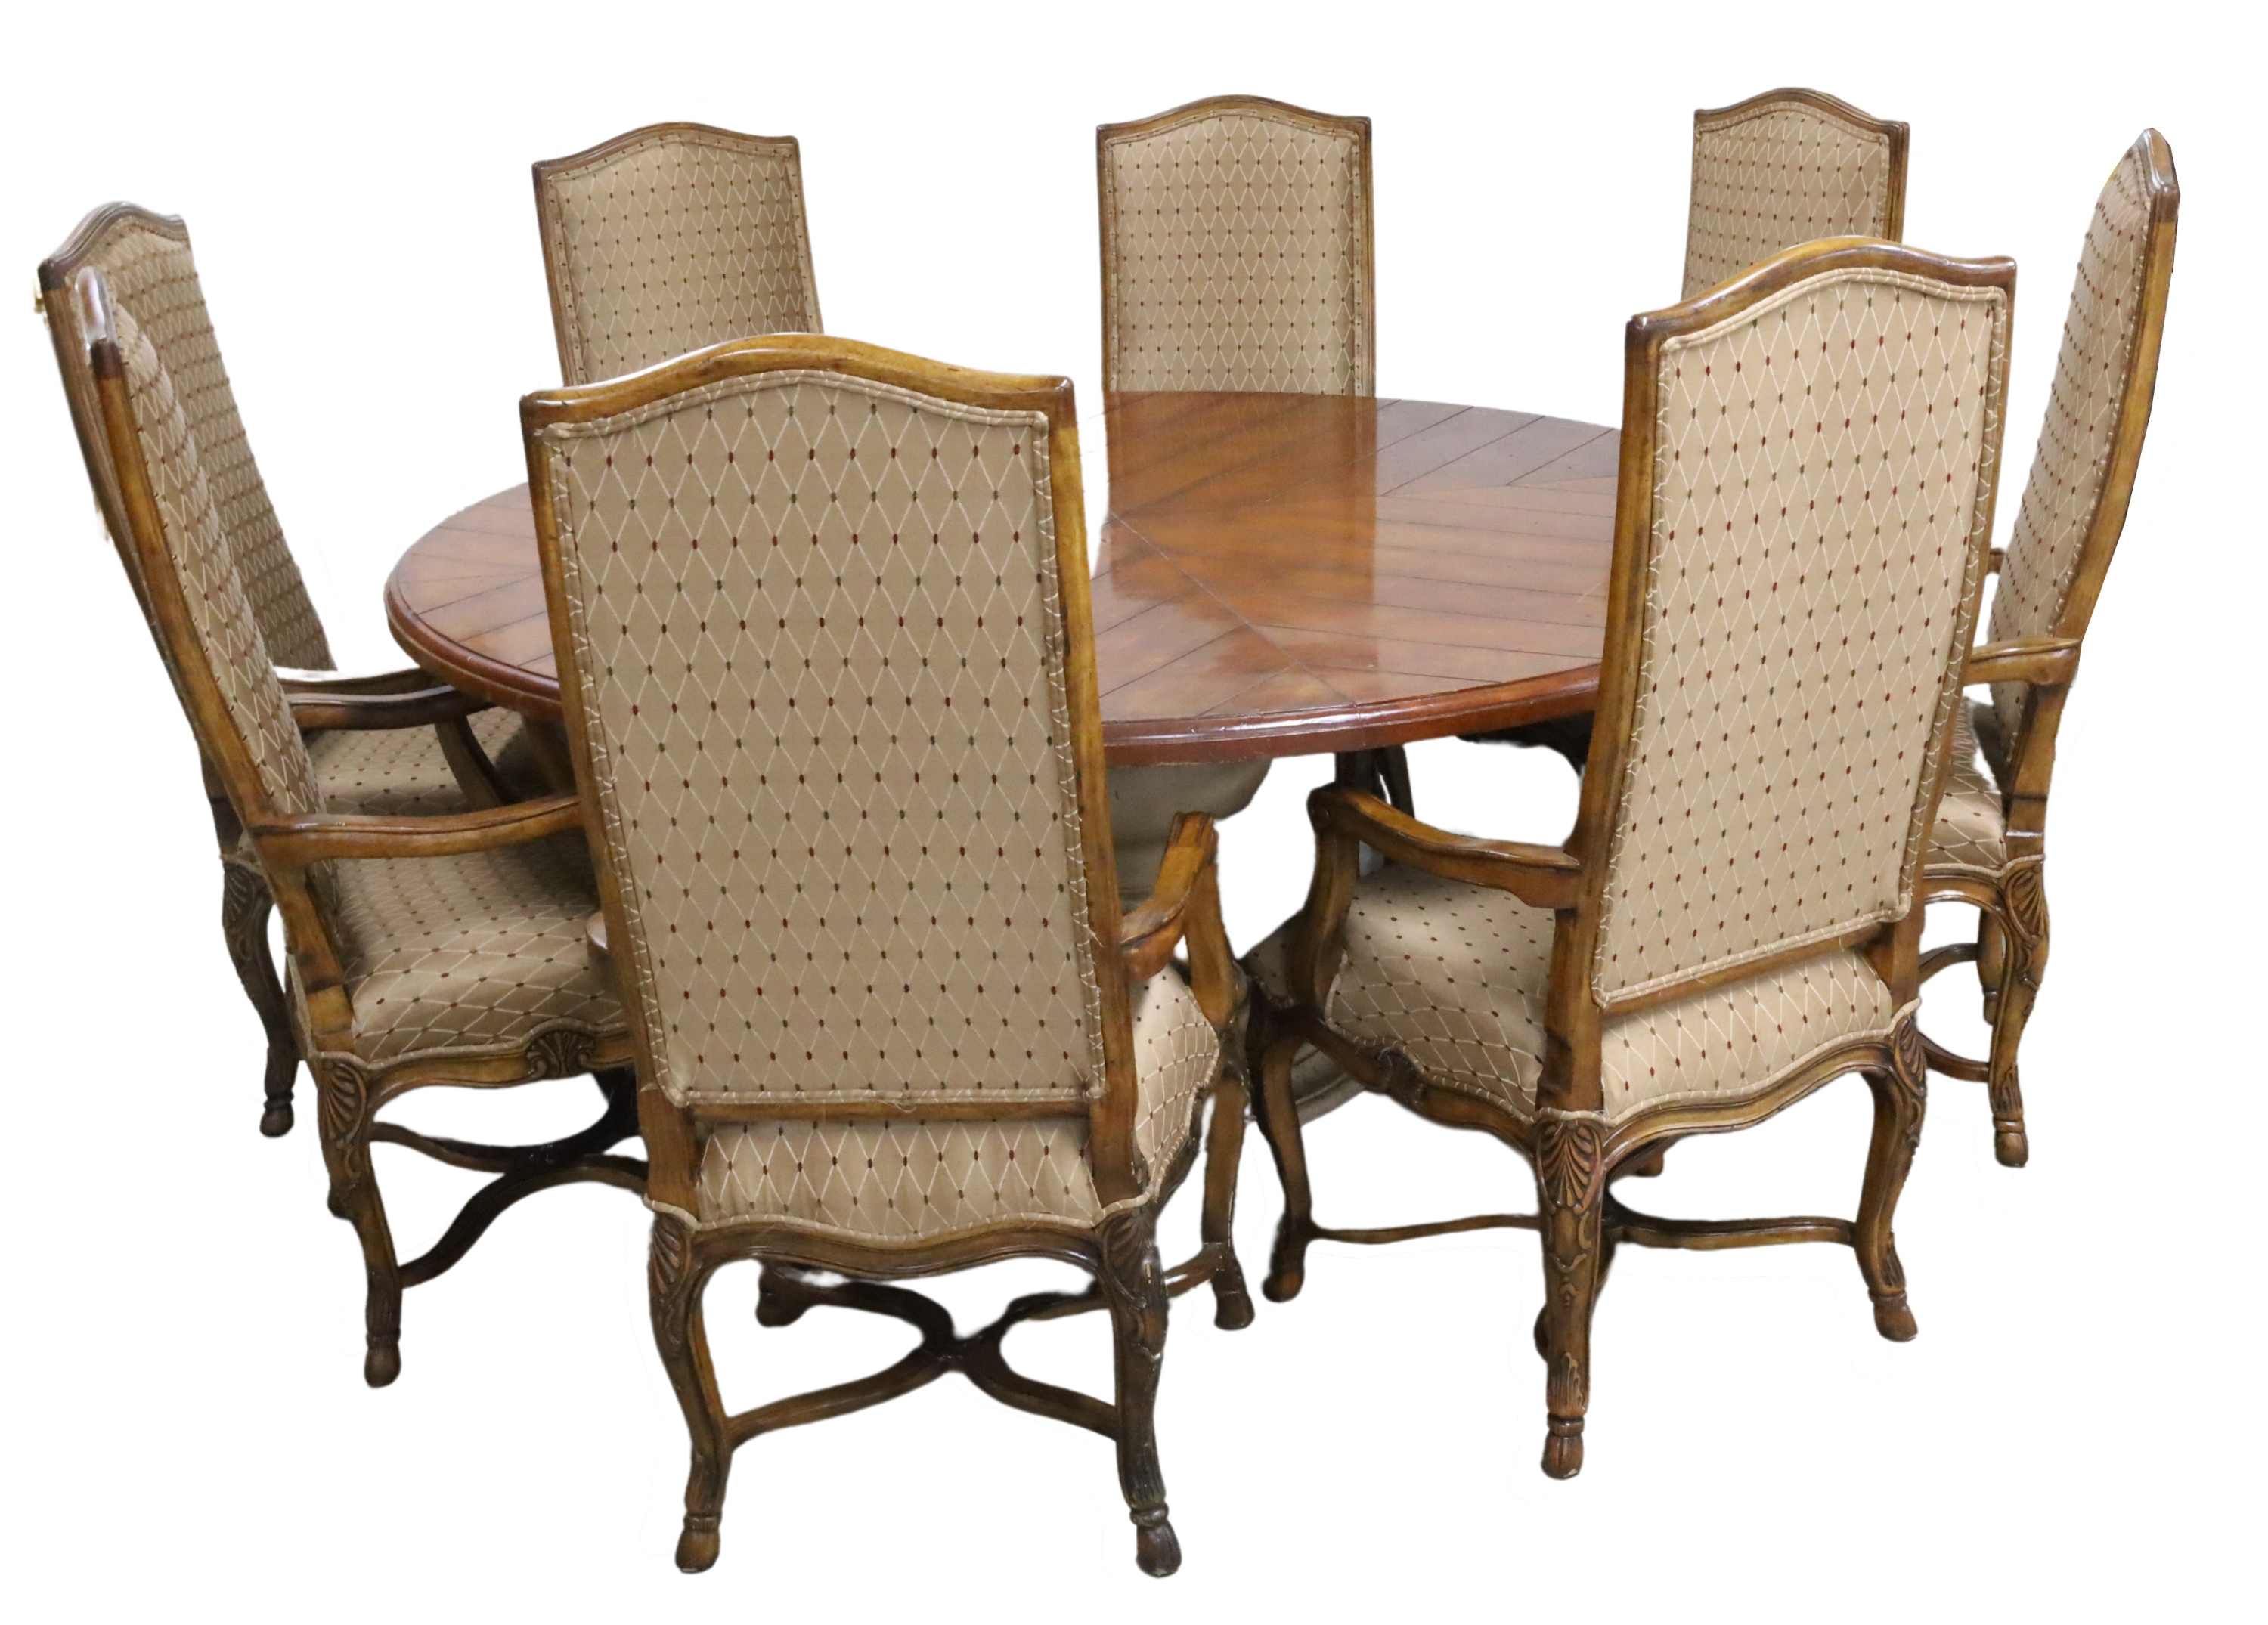 ROUND DINING TABLE 8 CHAIRS Contemporary